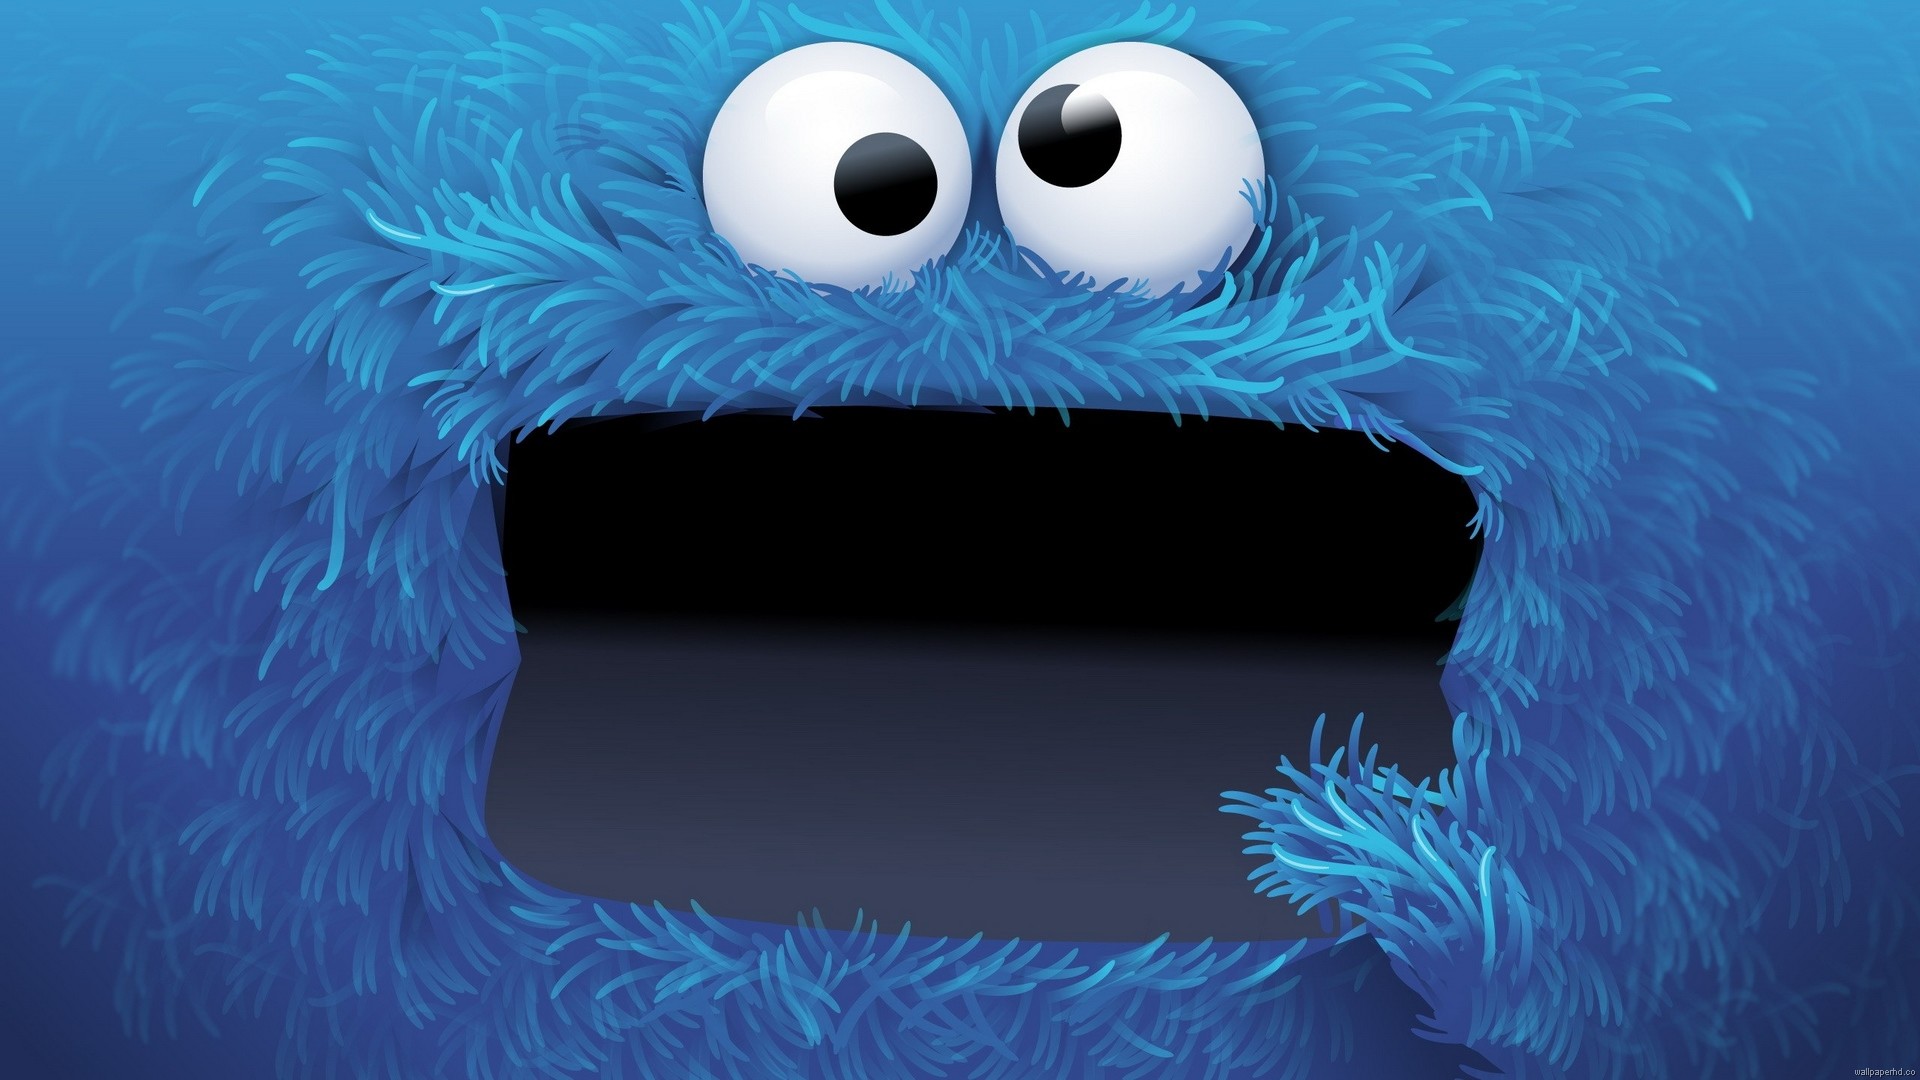 1920x1080 Download Cookie Monster 1920 x 1080 Wallpapers - 4559581 - Sesame Street  Character Muppet Television Show